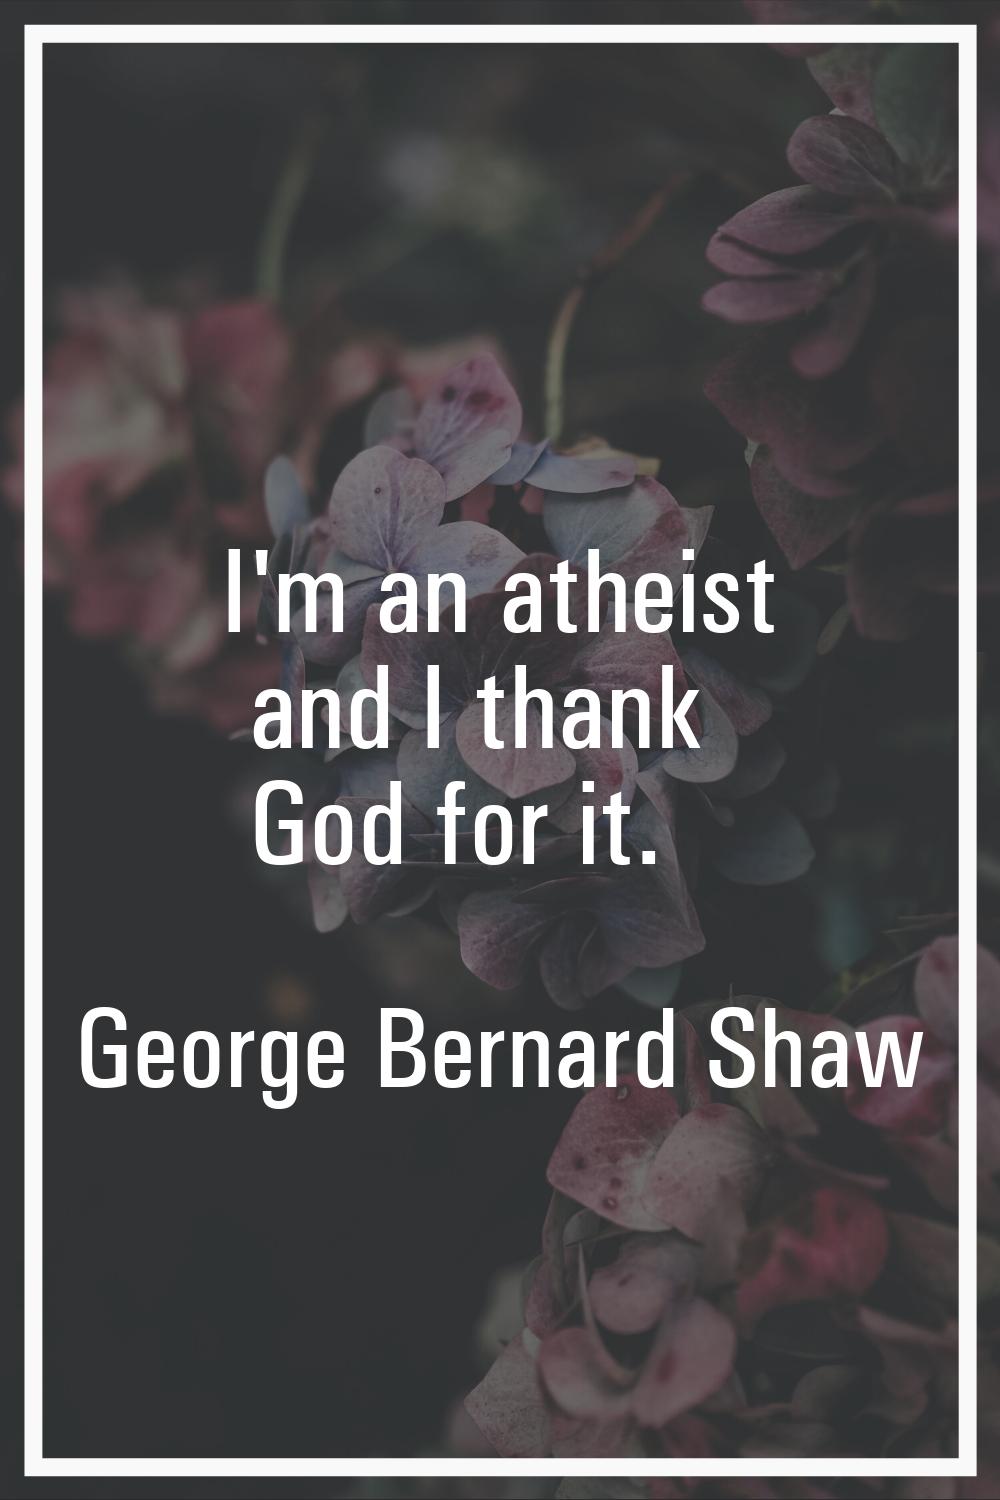 I'm an atheist and I thank God for it.